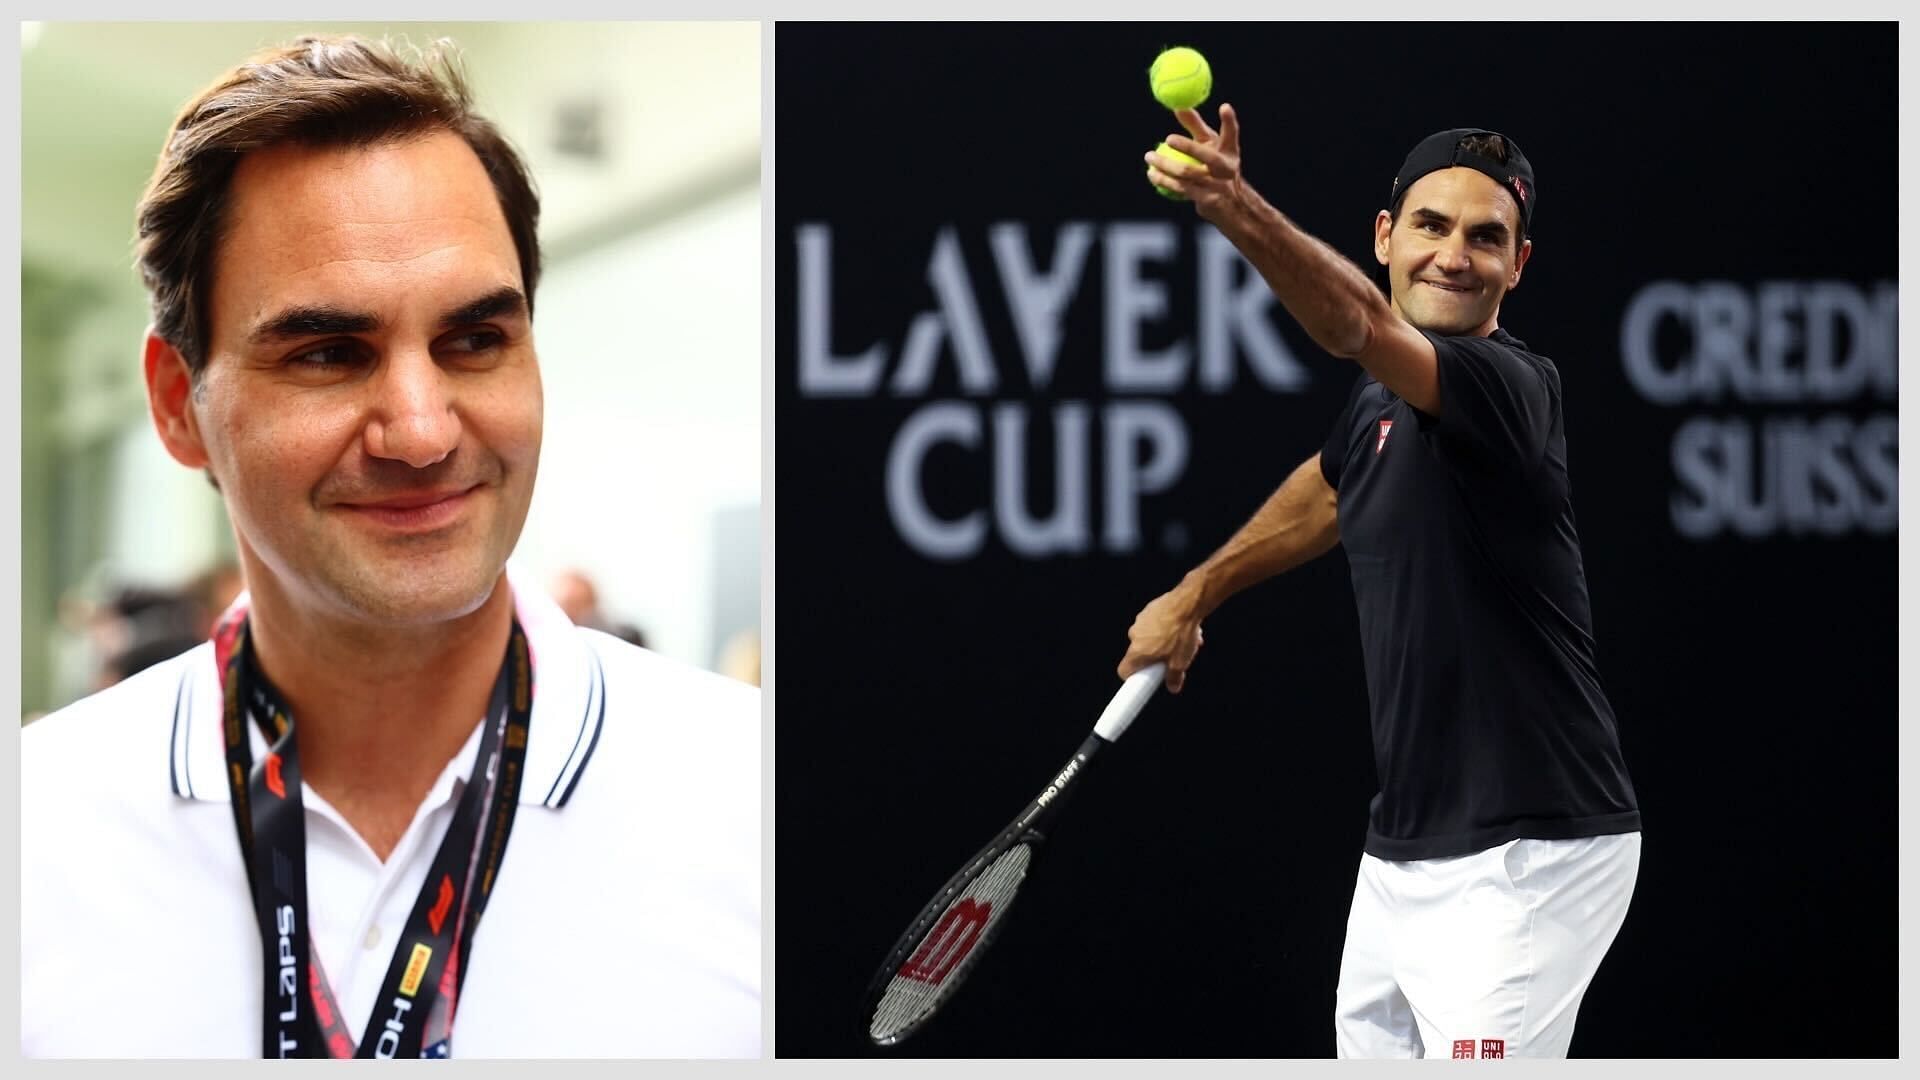 Michael Stich opined that Roger Federer could have retired a little sooner.